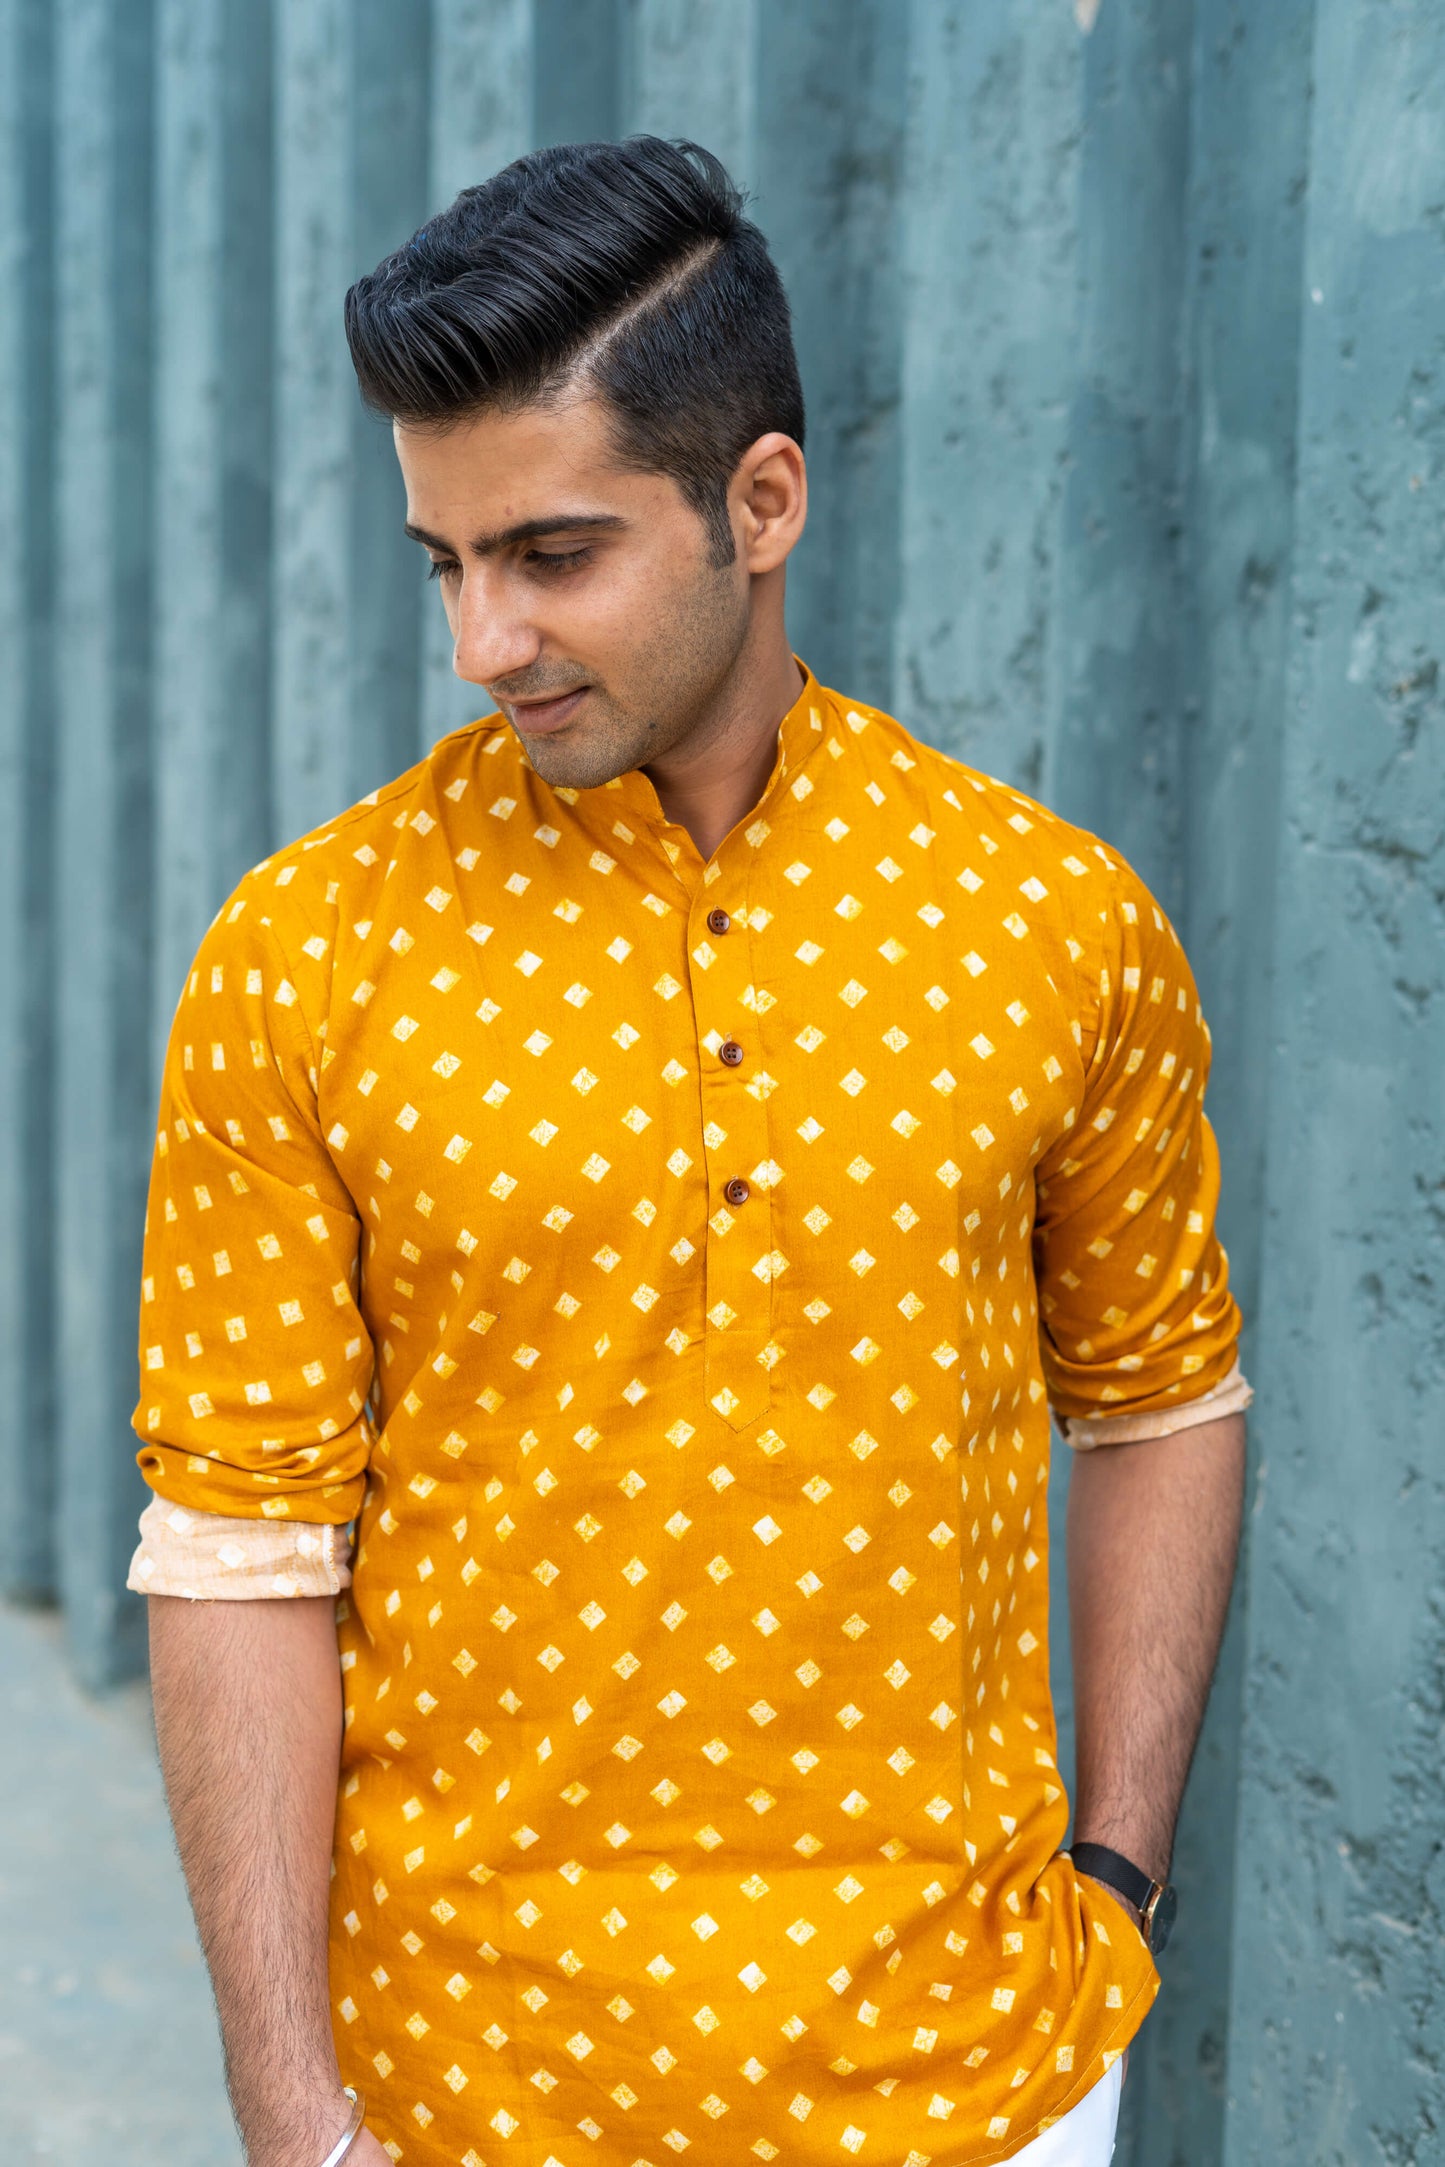 The Deep Yellow Short Kurta With Square All-Over Print